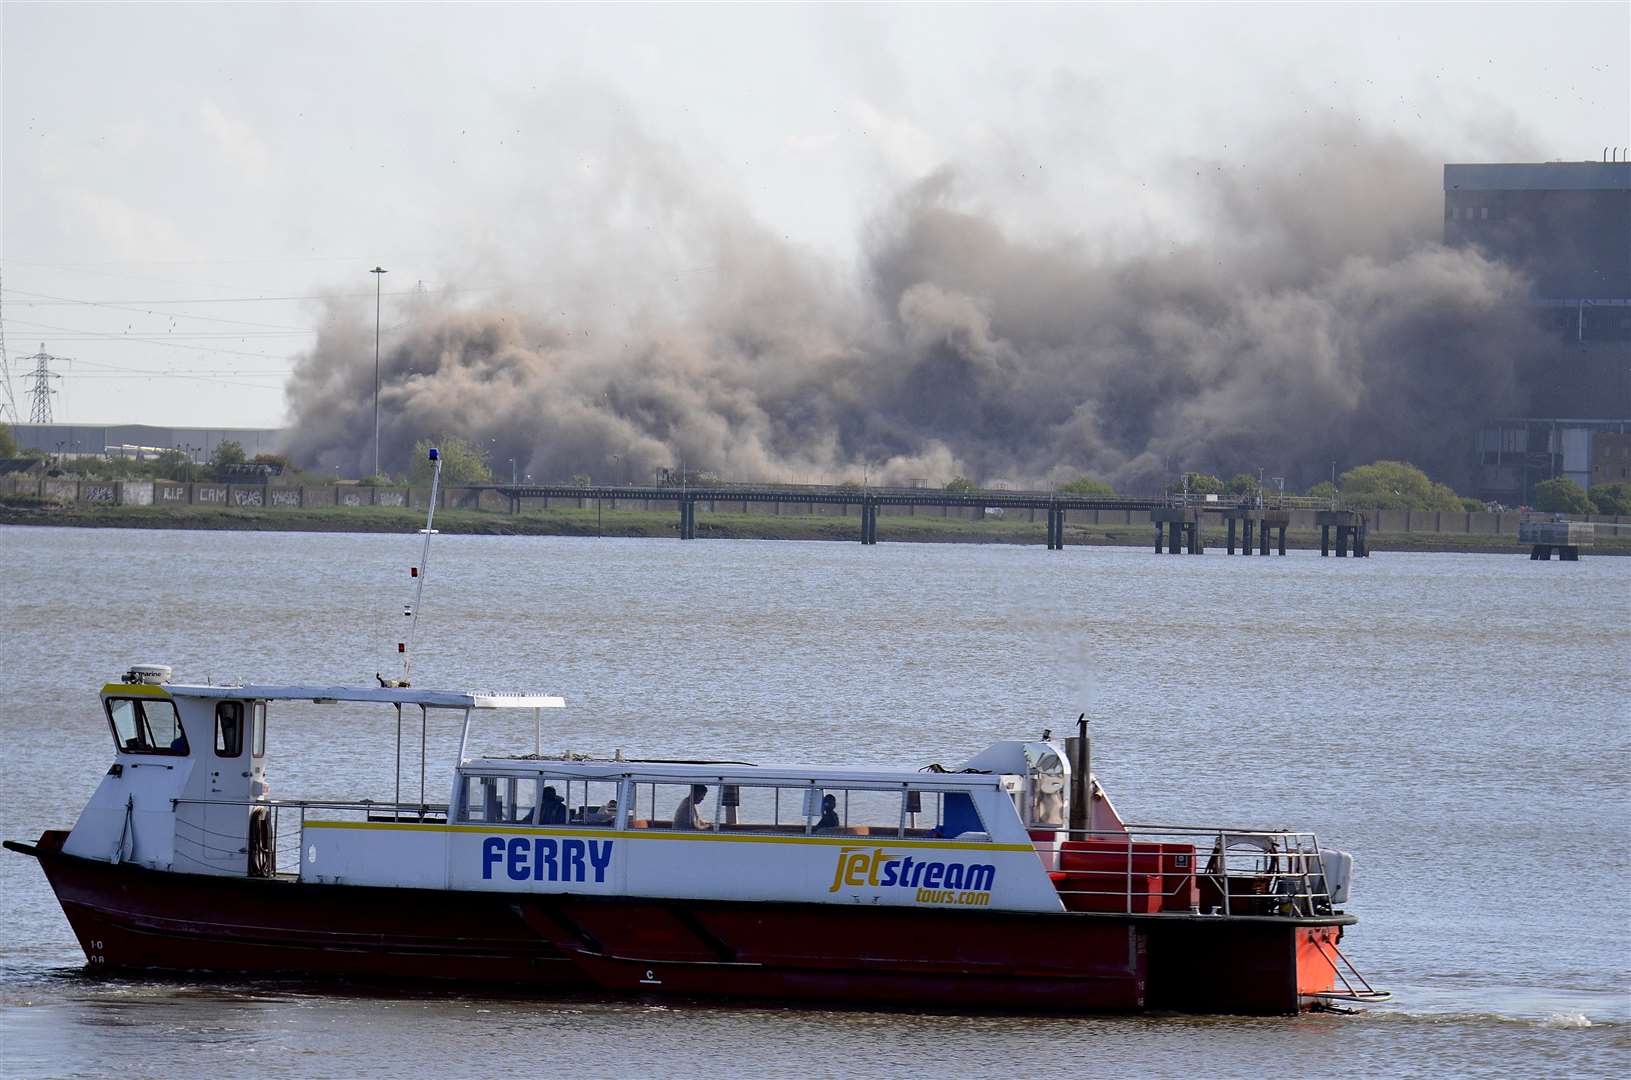 The aftermath of the explosion at Tilbury Power Station. Picture: Jason Arthur